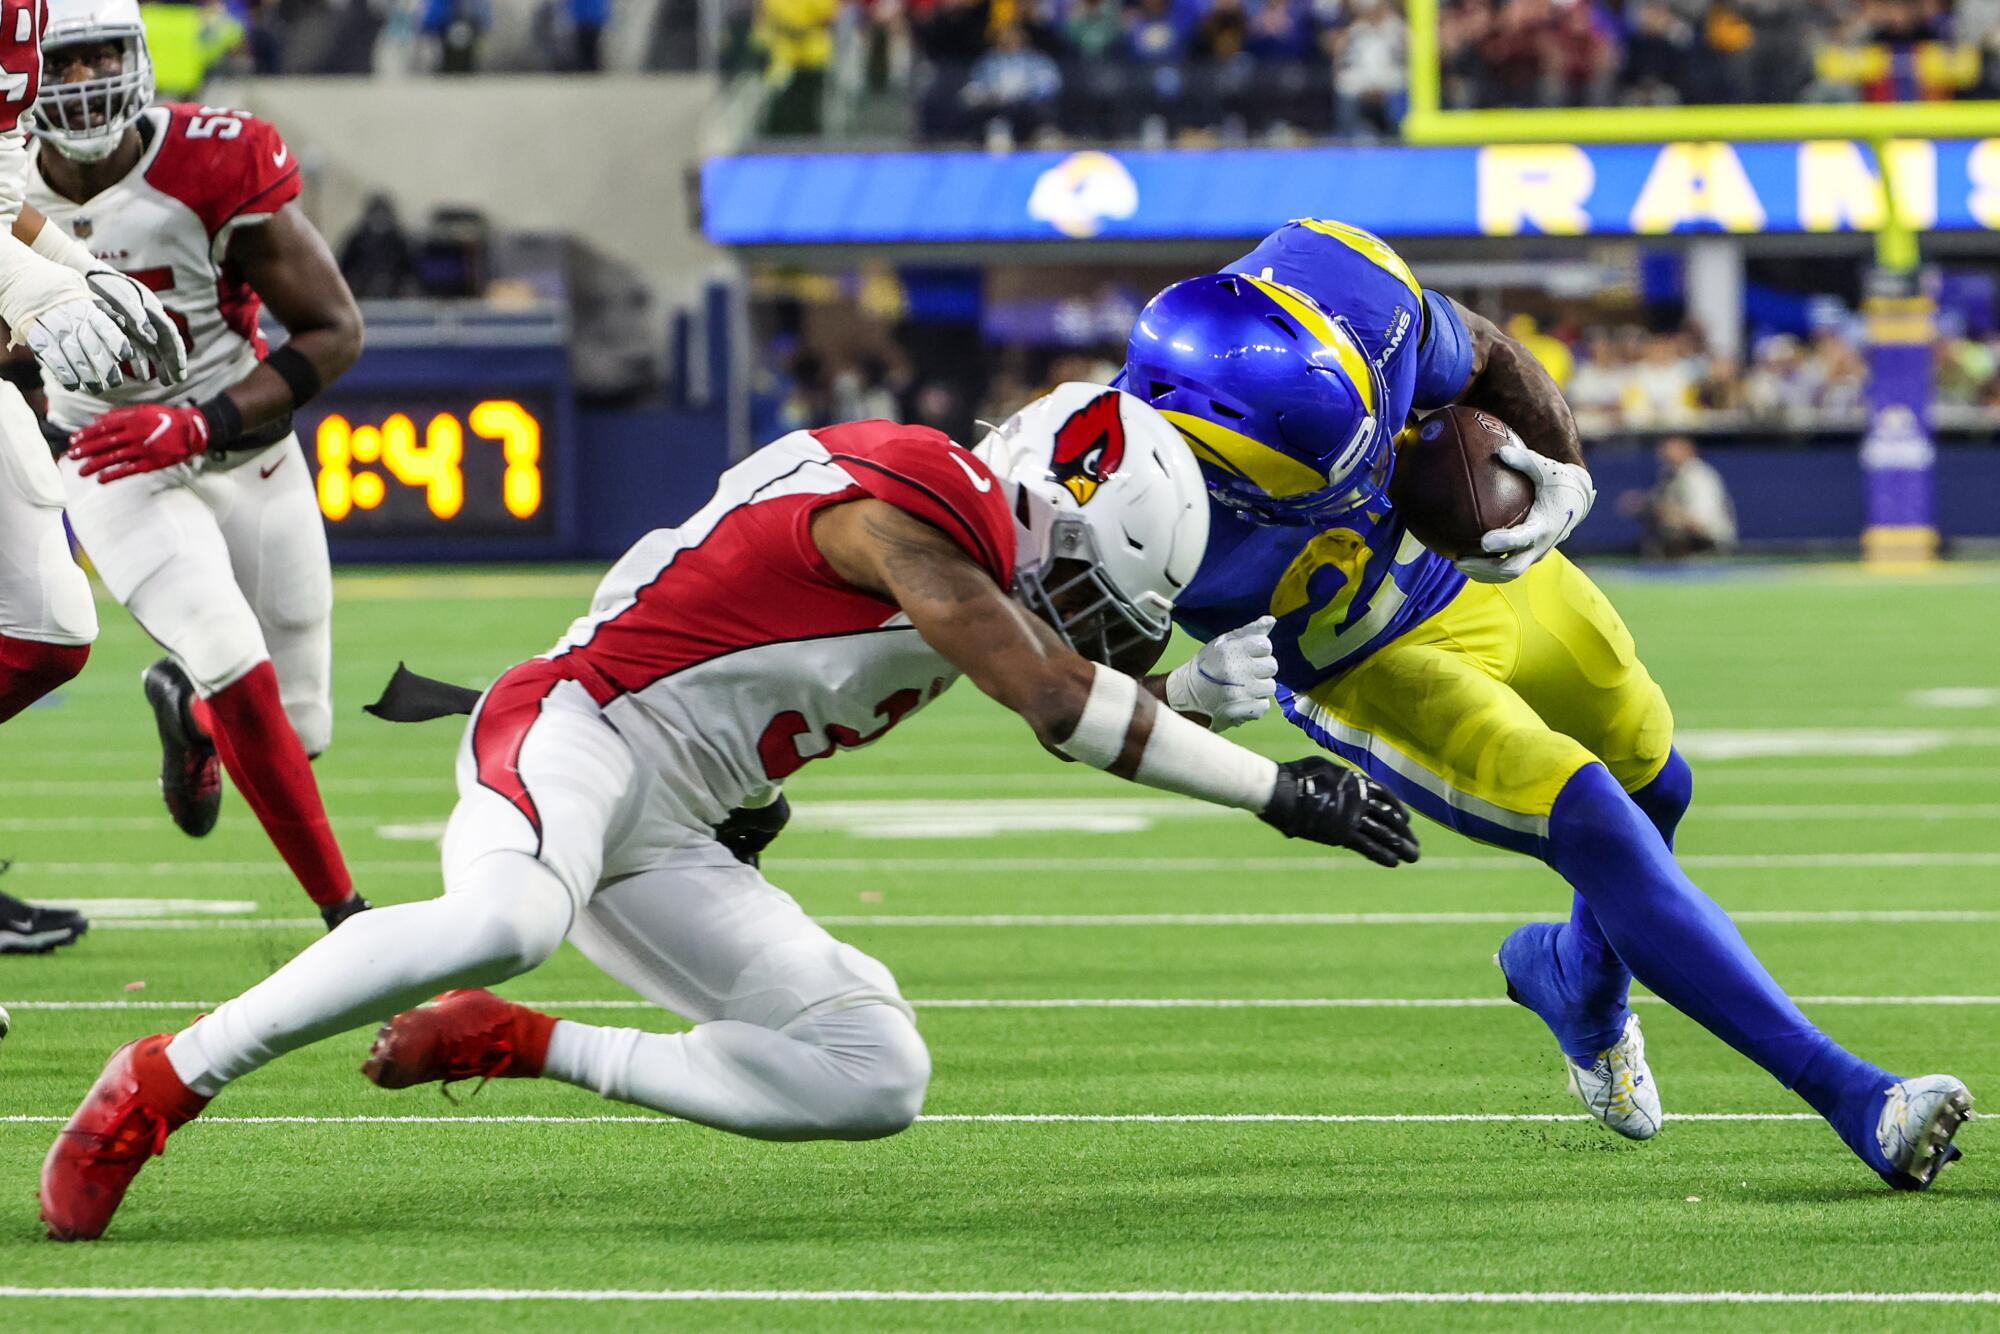 Arizona Cardinals safety Budda Baker and Rams running back Cam Akers collide during a play in the third quarter.